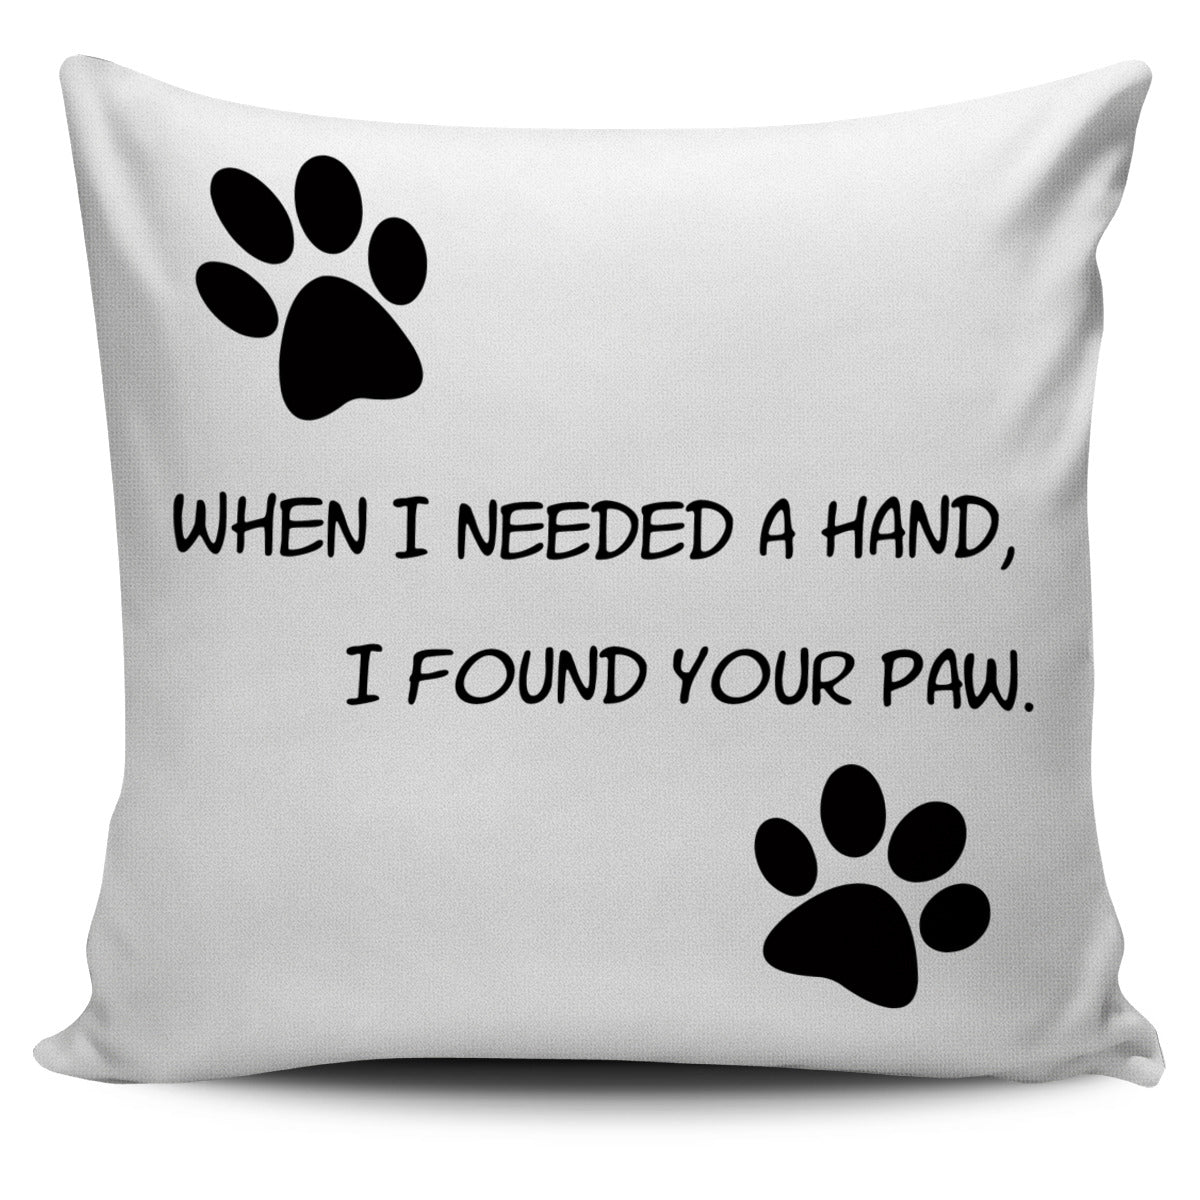 Paws Pillow Cover